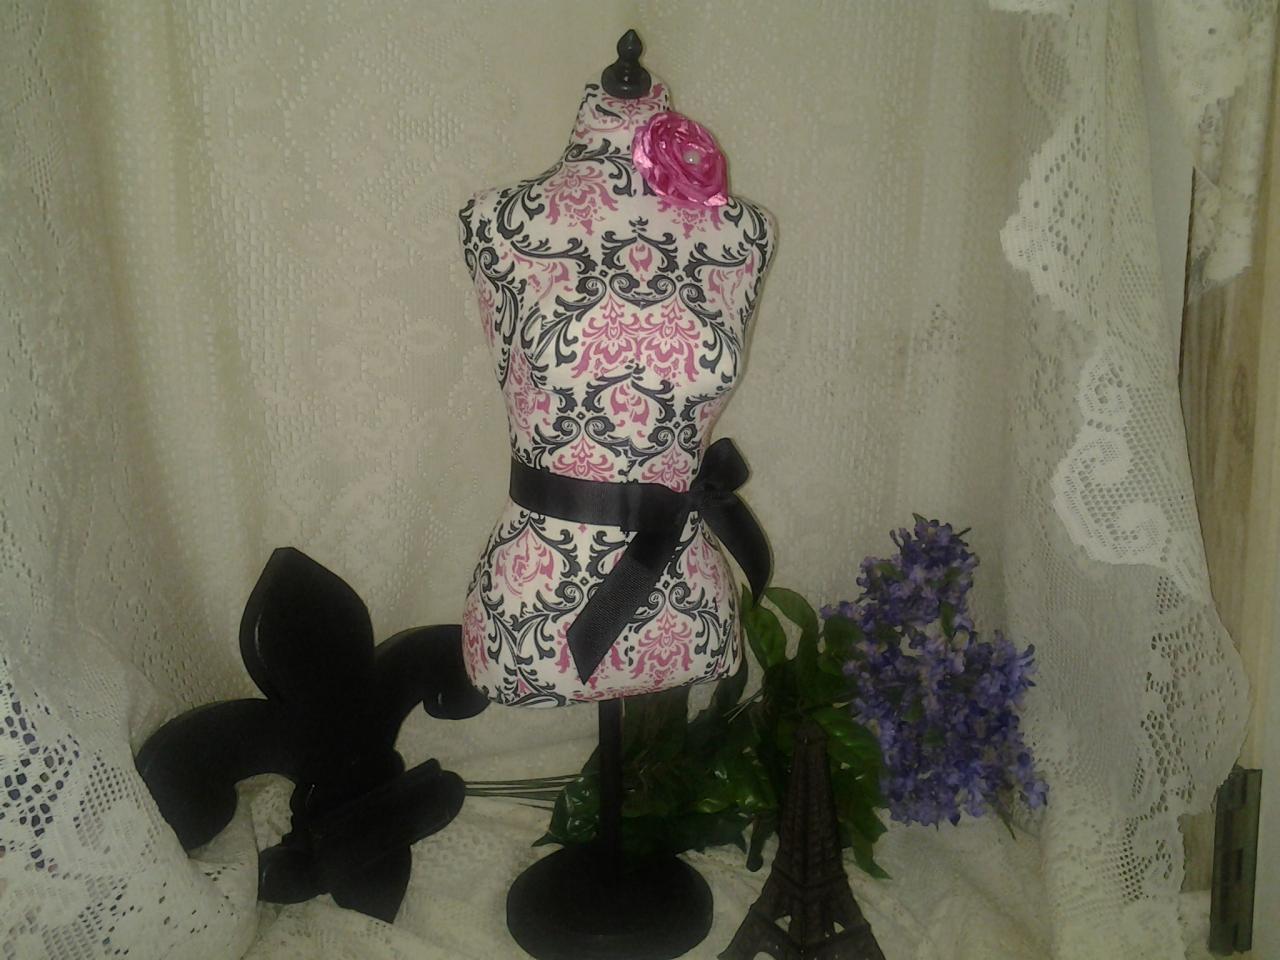 Boutique Dress Form Designs Jewelry Display, Pink And Black 19" Torso Great For Store Front Display Or Home Decor.